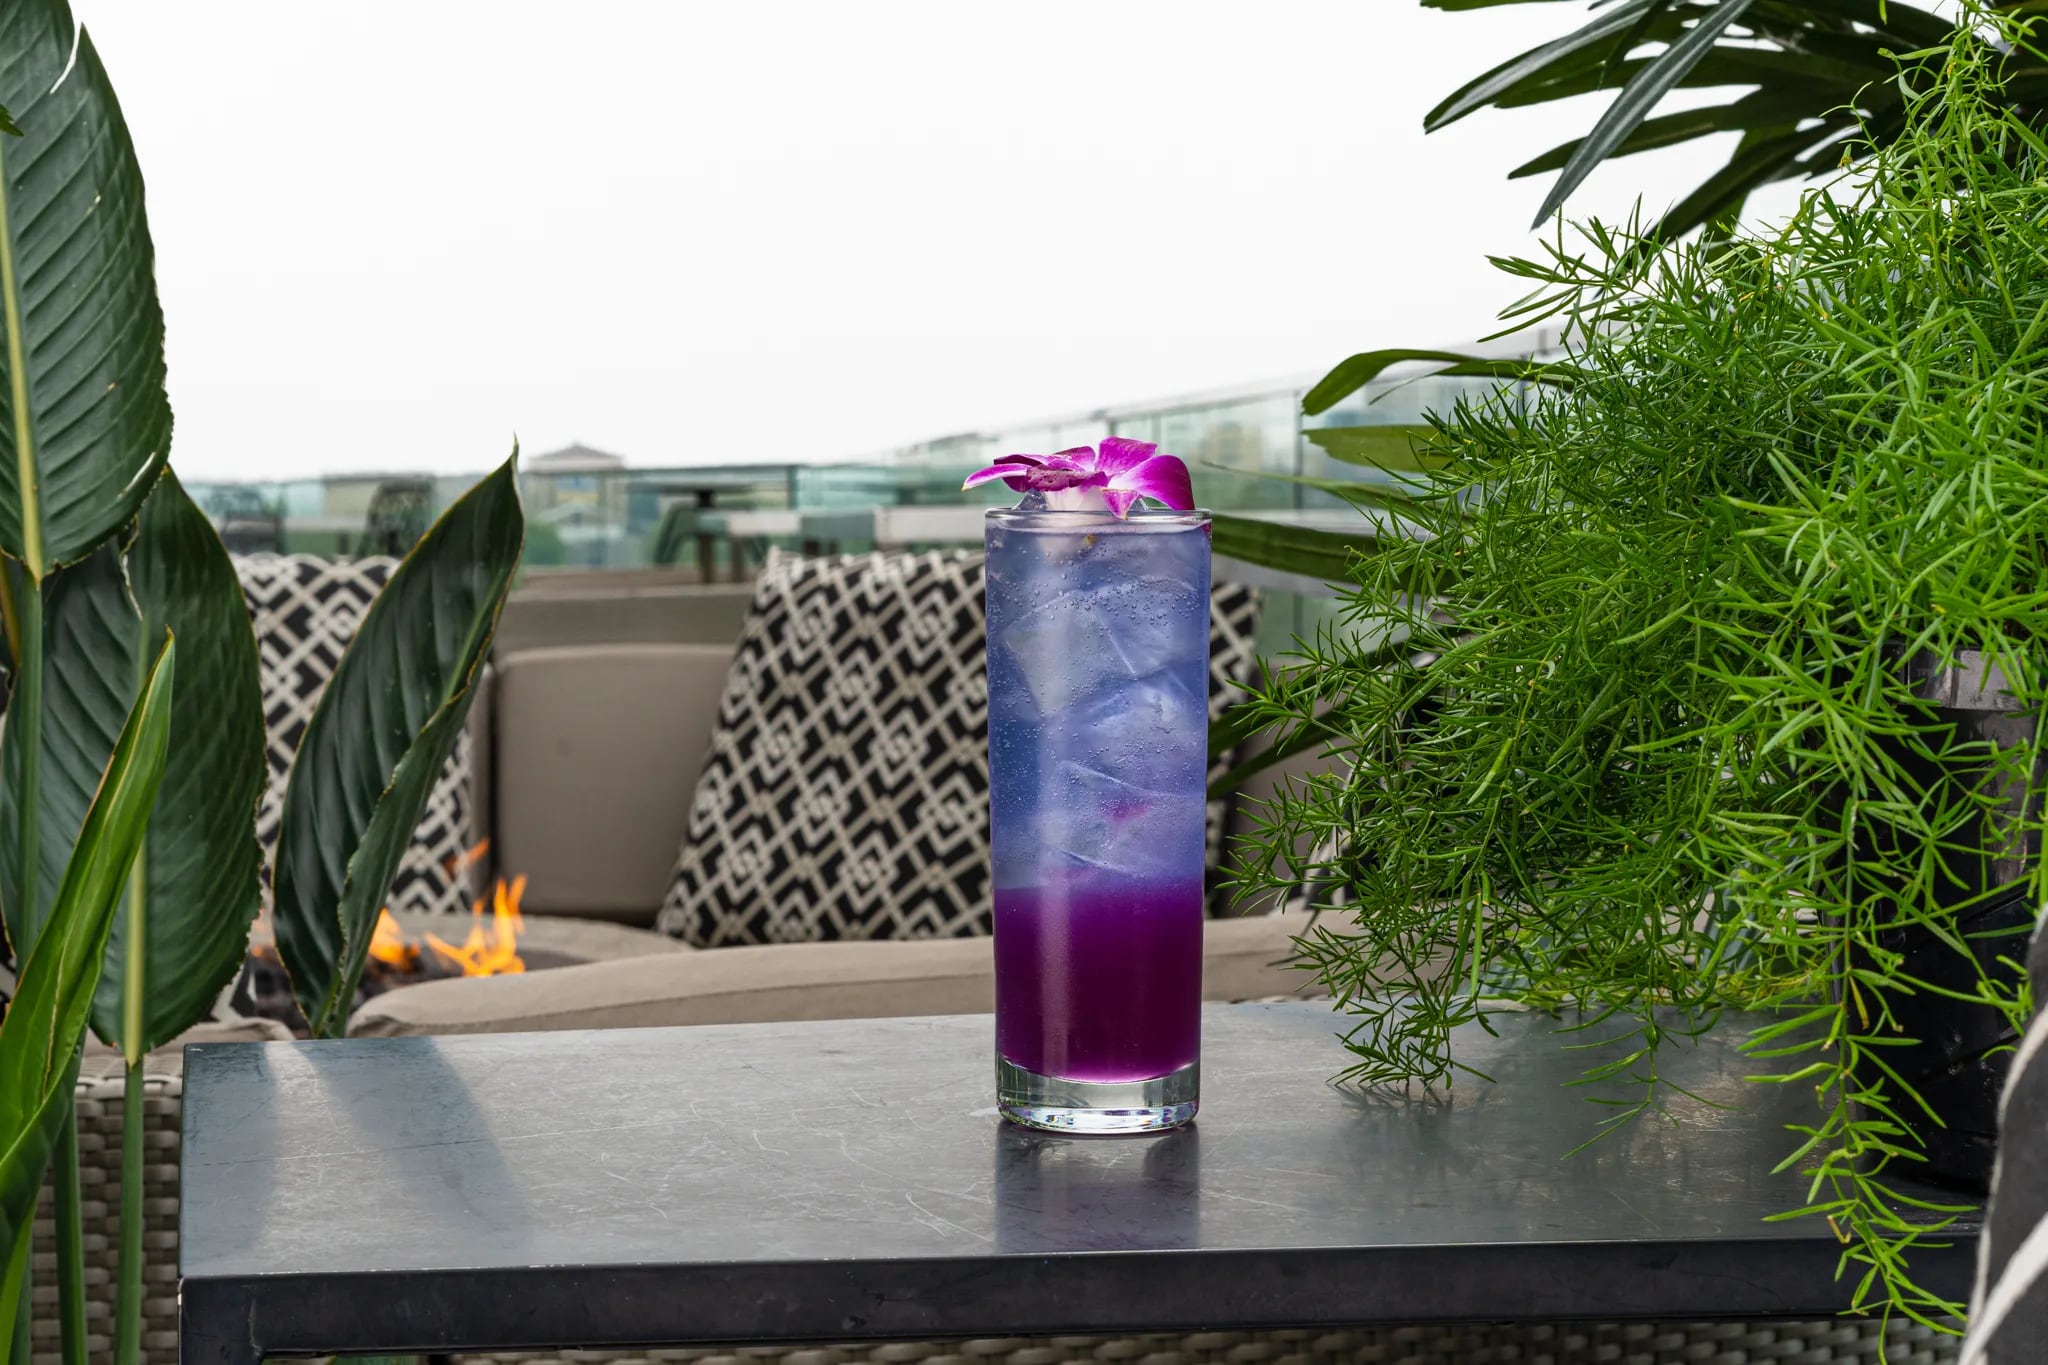 Sip on the Lavender Haze cocktail at Assembly Rooftop.